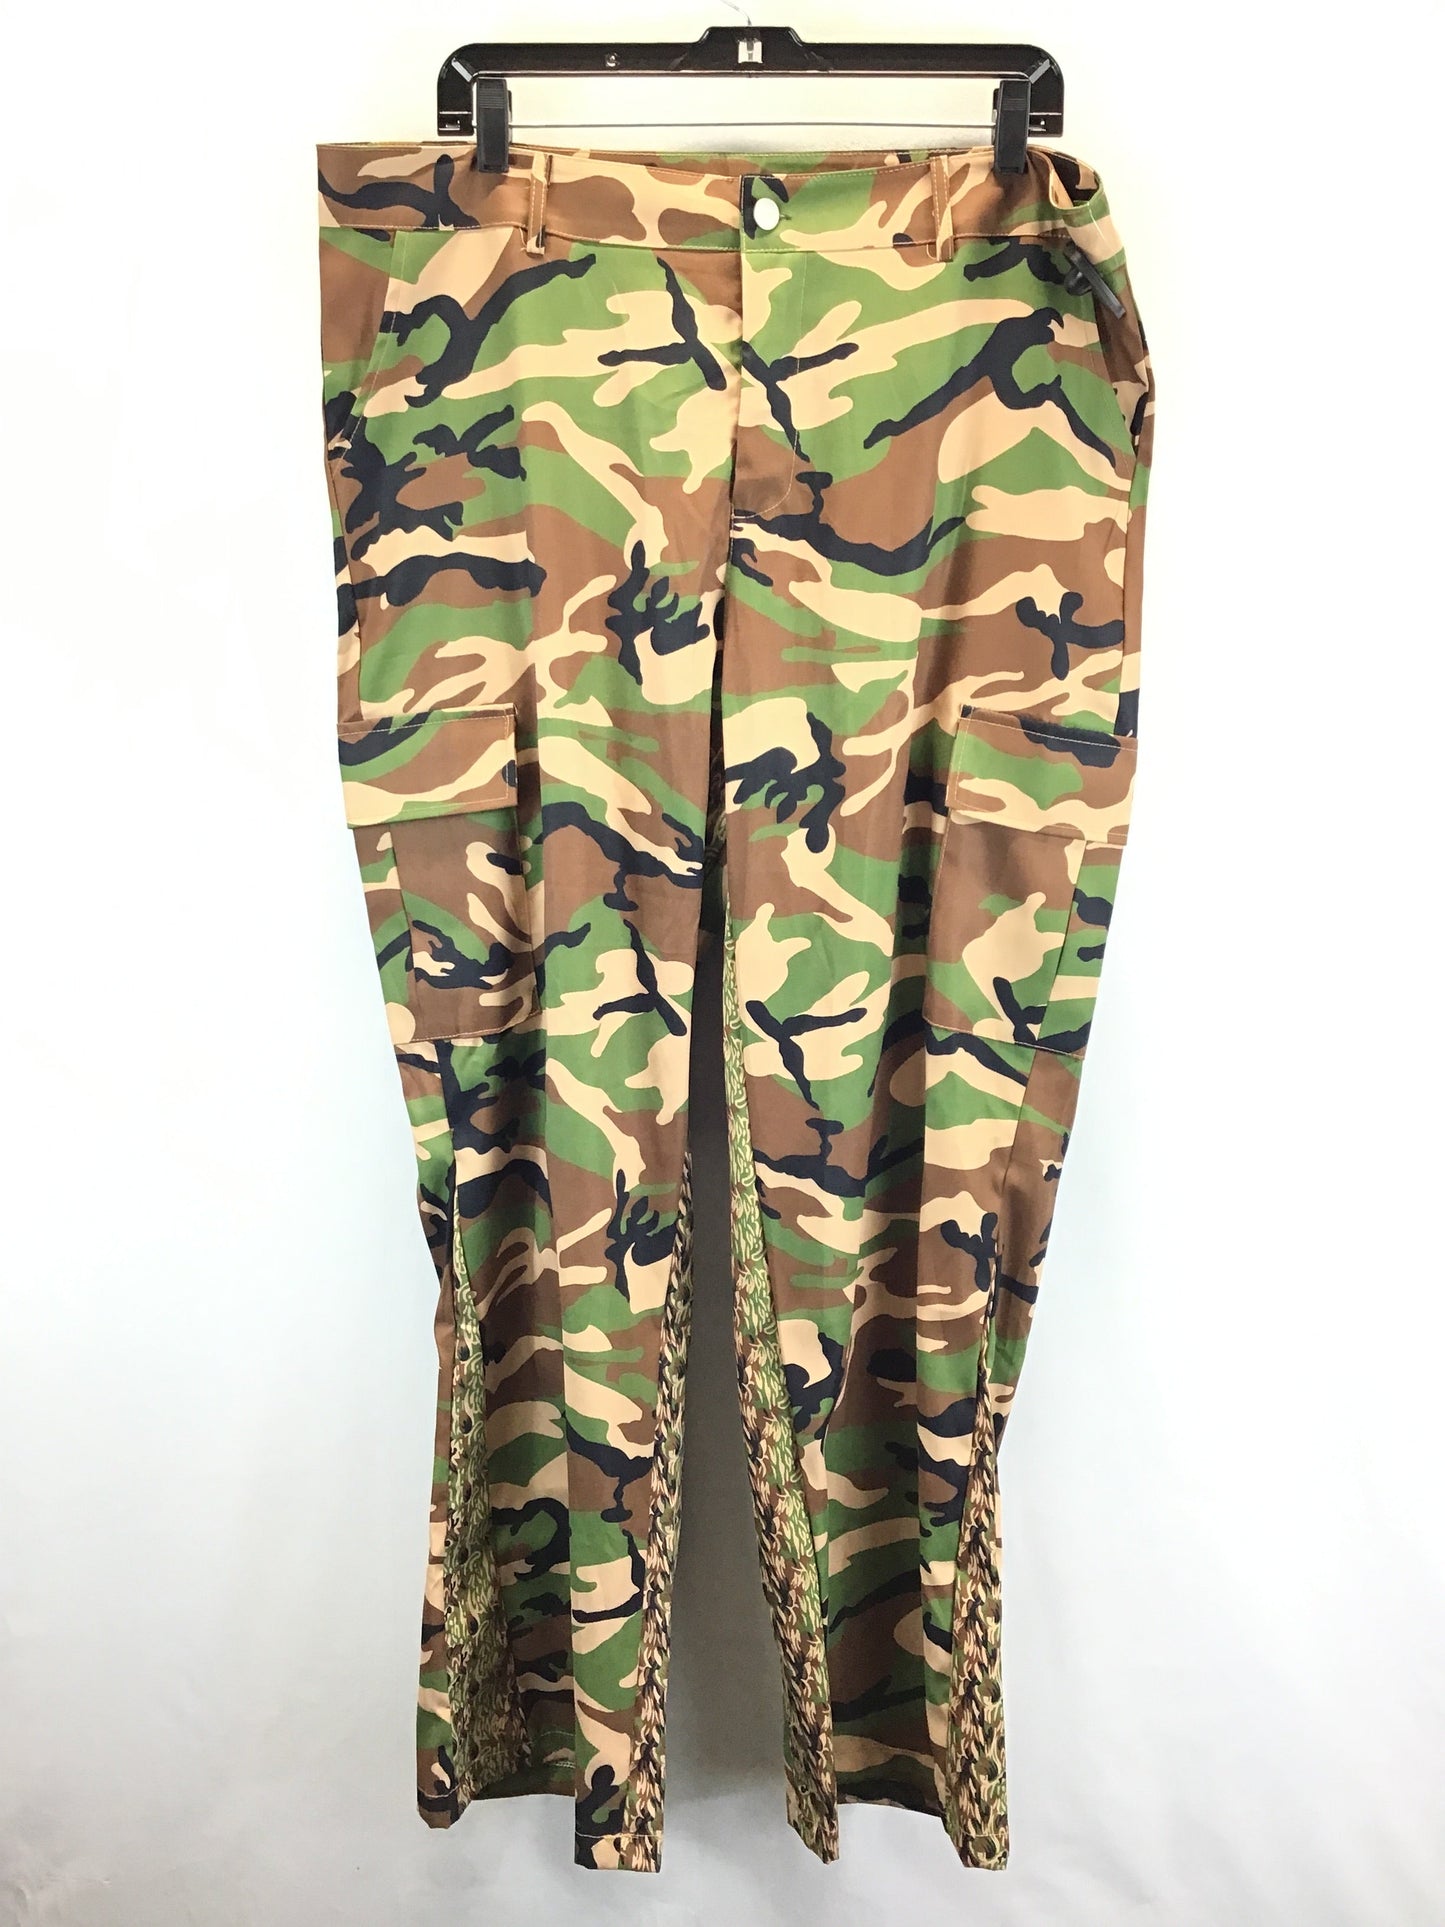 Camouflage Print Pants Cargo & Utility Clothes Mentor, Size 1x